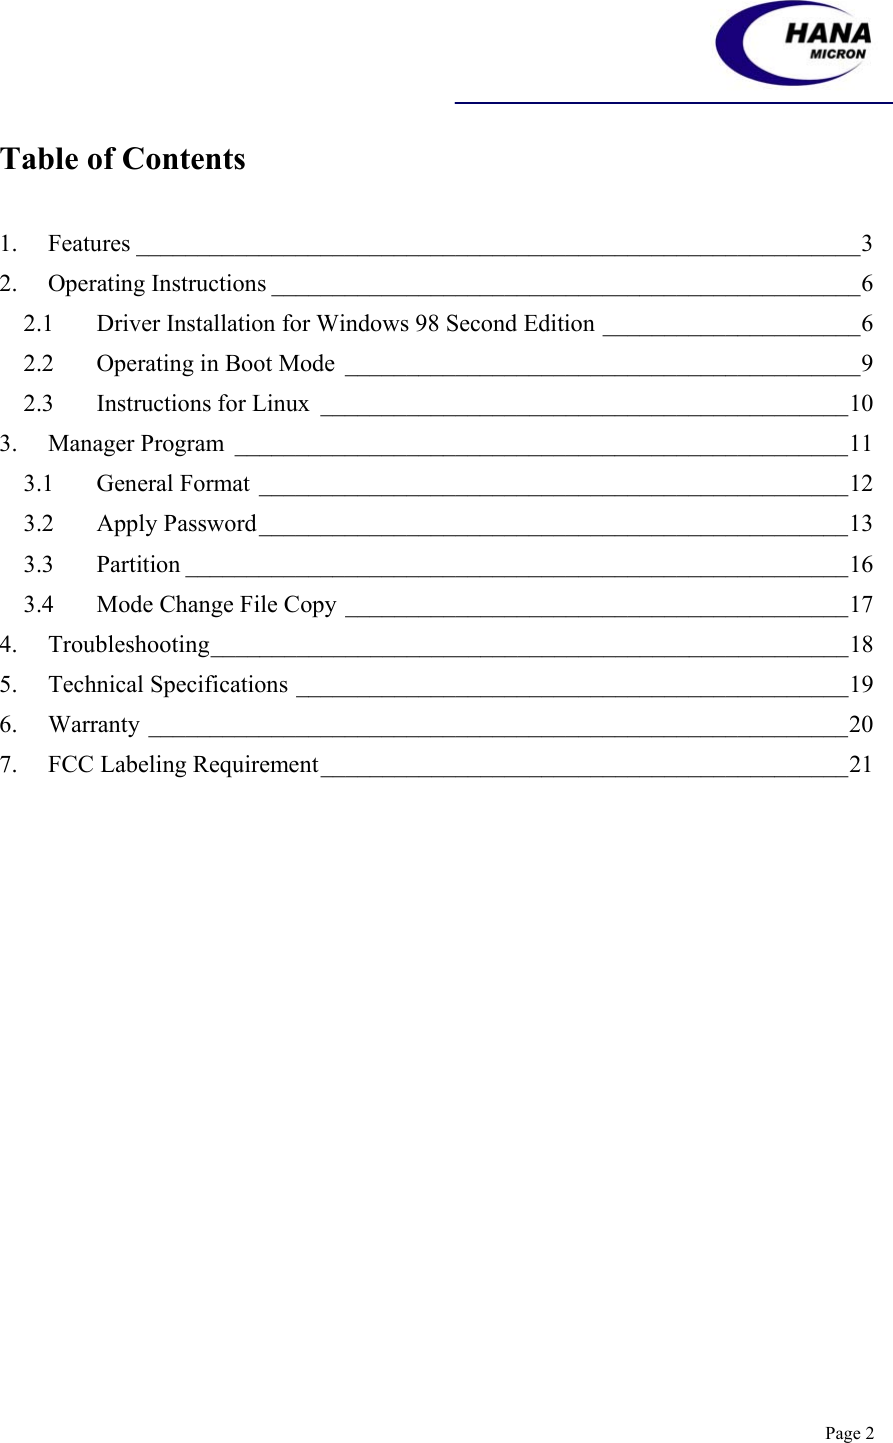    Page 2 Table of Contents  1. Features ___________________________________________________________3 2. Operating Instructions ________________________________________________6 2.1 Driver Installation for Windows 98 Second Edition _____________________6 2.2 Operating in Boot Mode __________________________________________9 2.3 Instructions for Linux ___________________________________________10 3. Manager Program __________________________________________________11 3.1 General Format ________________________________________________12 3.2 Apply Password________________________________________________13 3.3 Partition ______________________________________________________16 3.4 Mode Change File Copy _________________________________________17 4. Troubleshooting____________________________________________________18 5. Technical Specifications _____________________________________________19 6. Warranty _________________________________________________________20 7. FCC Labeling Requirement___________________________________________21    